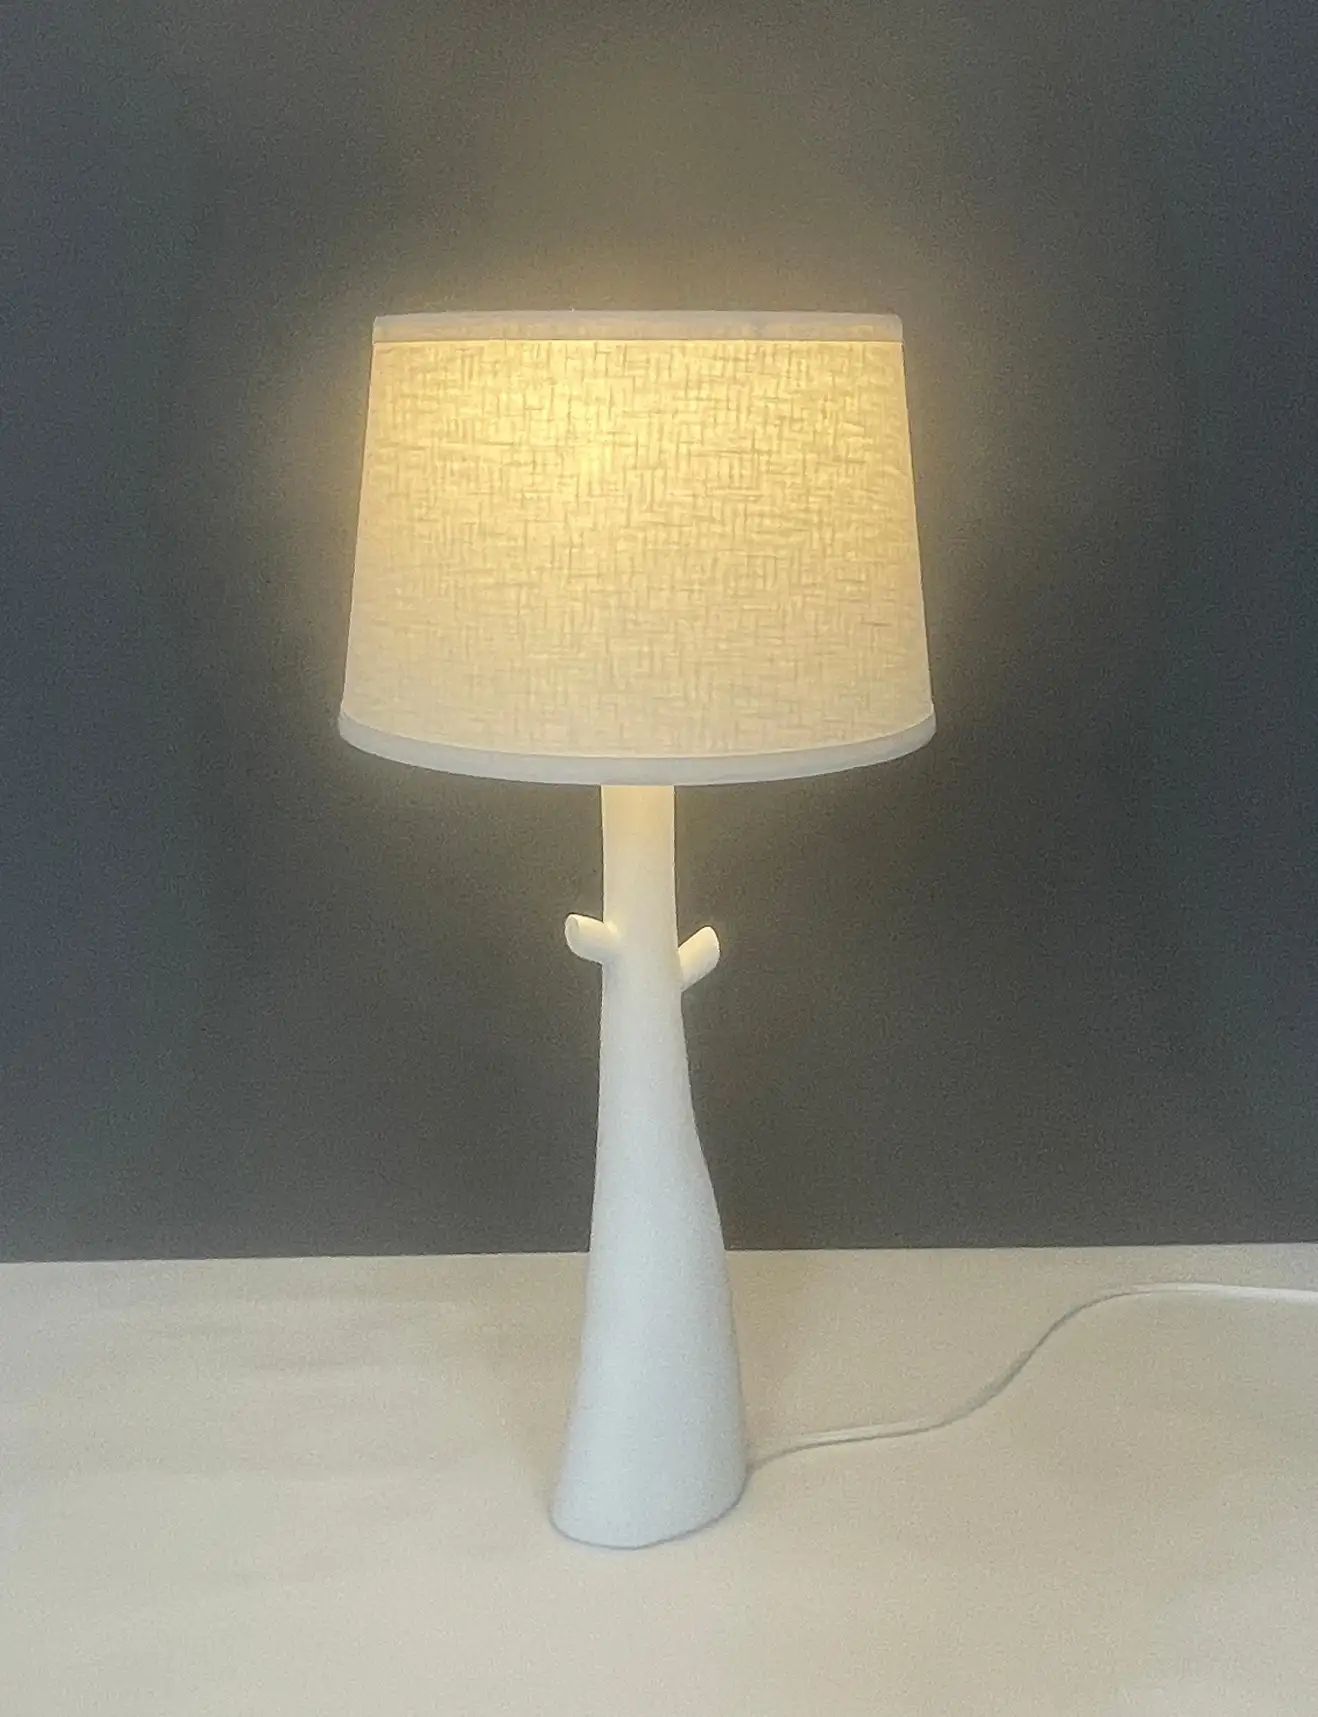 Table lamp MONCEAU by Bourgeois Boheme Atelier